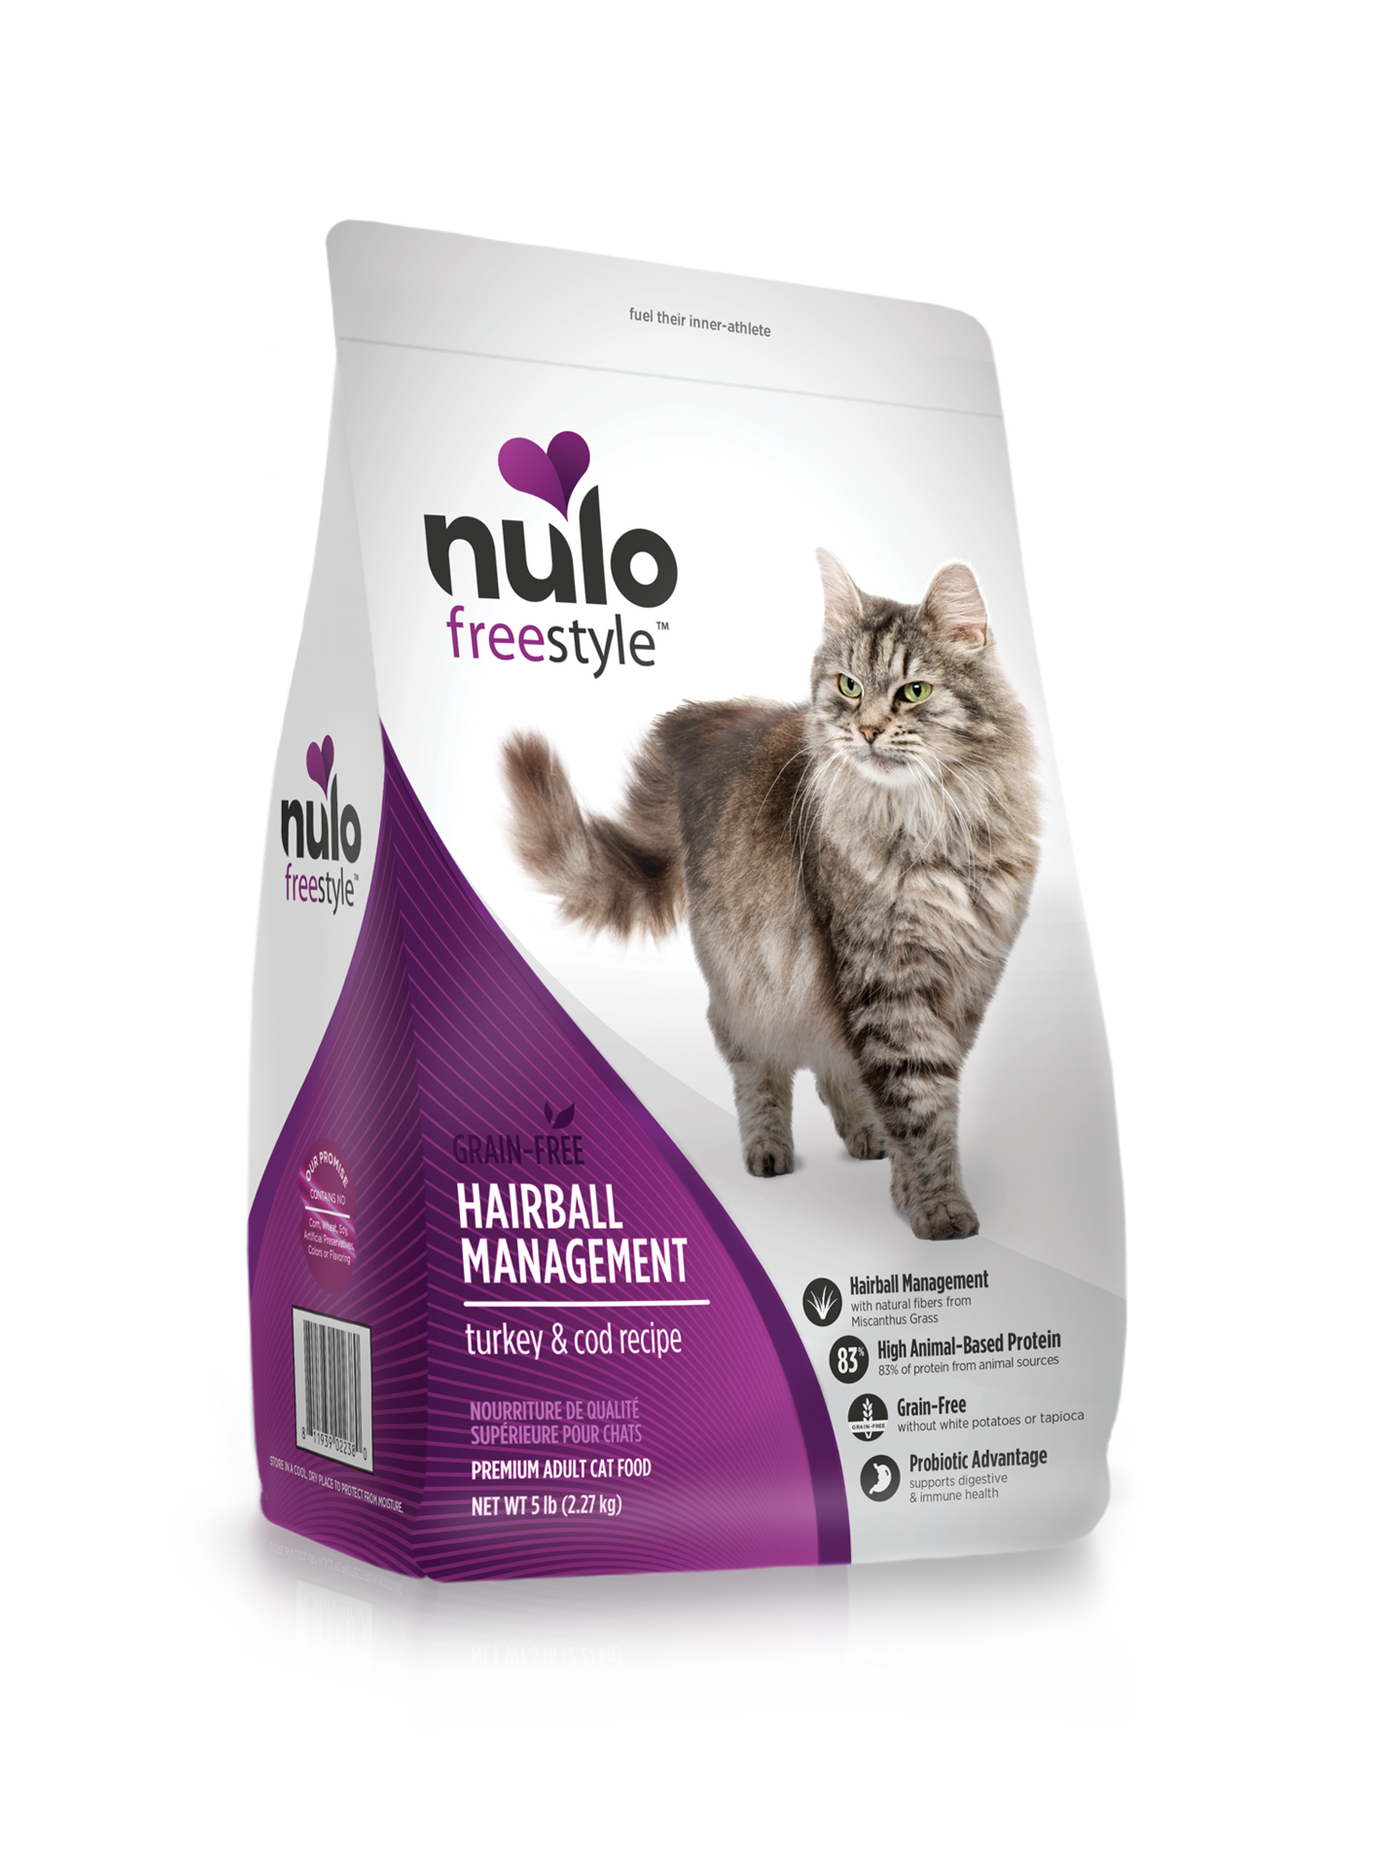 nulo hairball management cat food